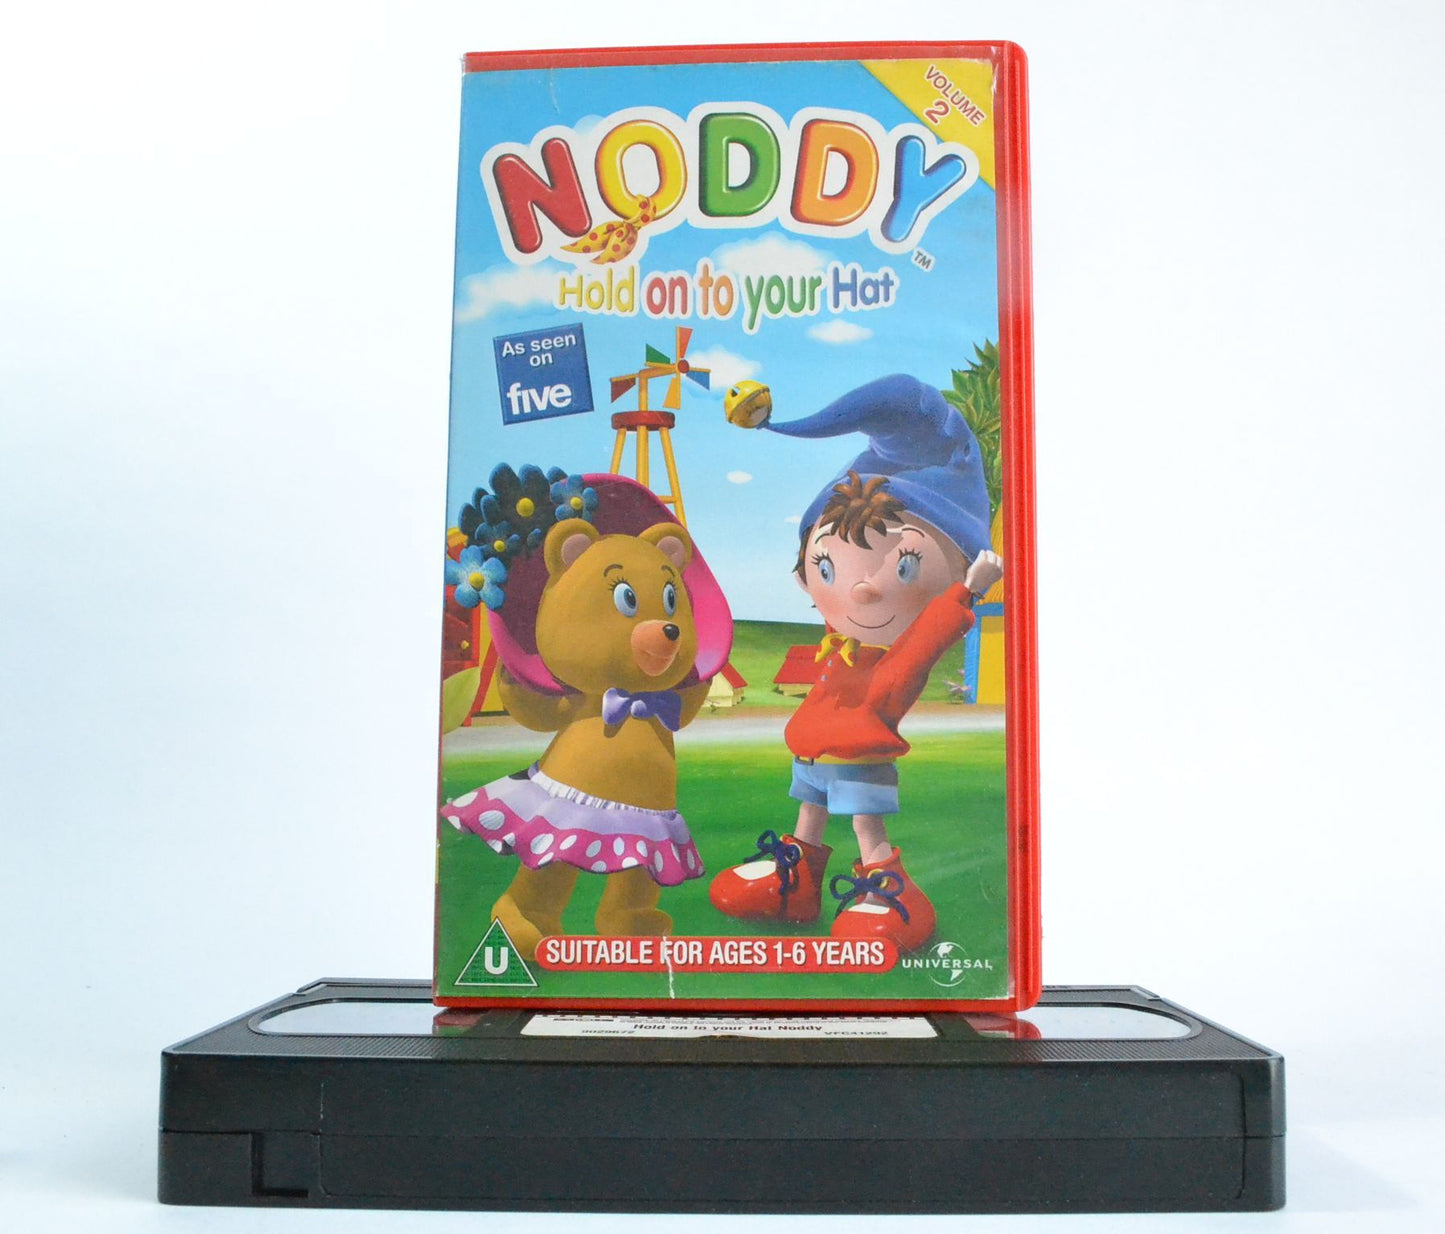 Noddy (Vol. 2): Hold On To Your Hat - Children's 1-6 Years Old - Education - VHS-